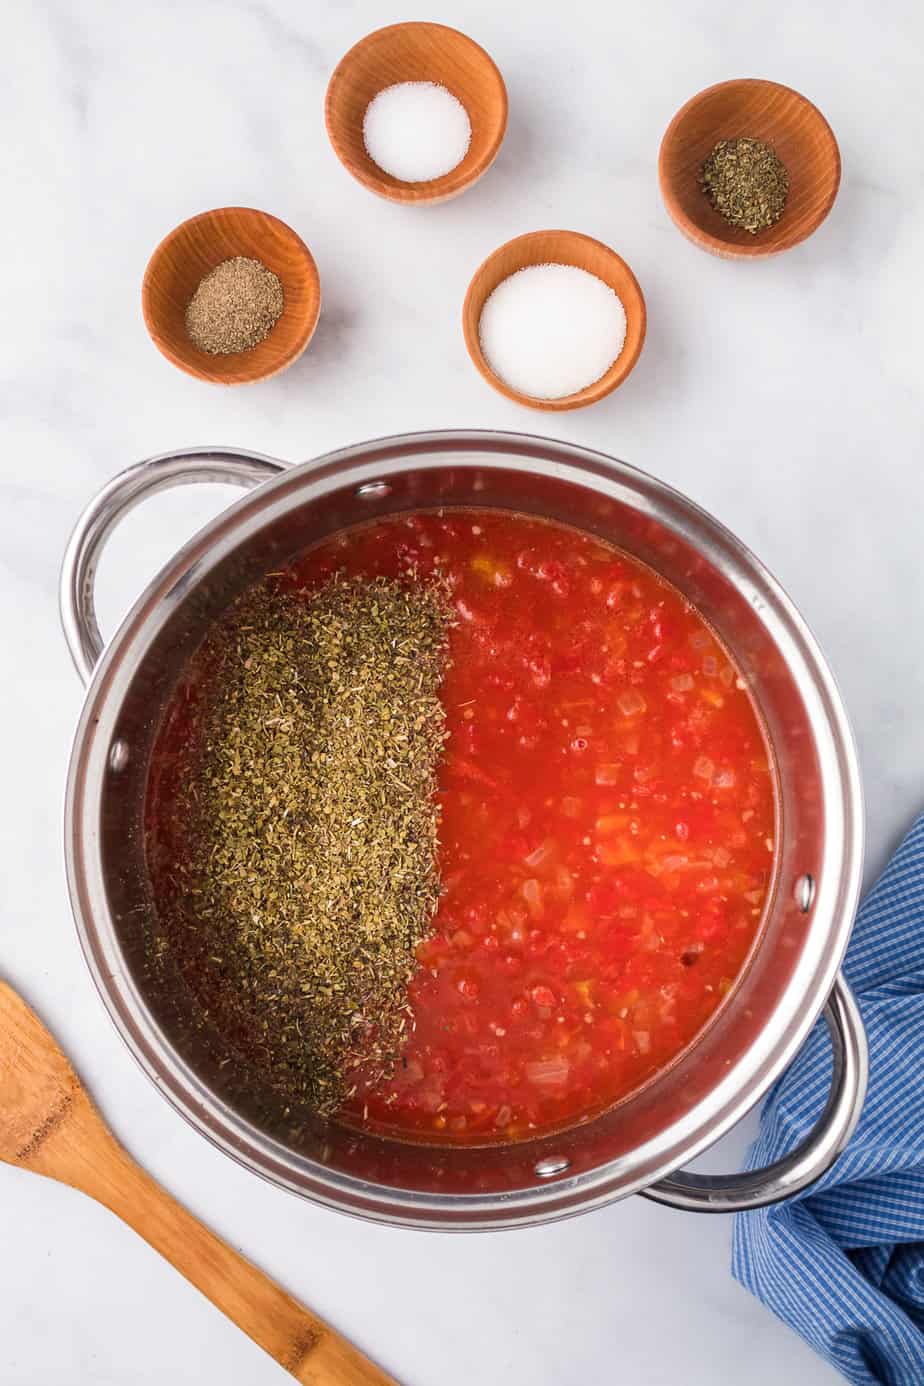 Italian herbs in a pot full of tomatoes from overhead with more herbs and spices in small bowls on the counter nearby.